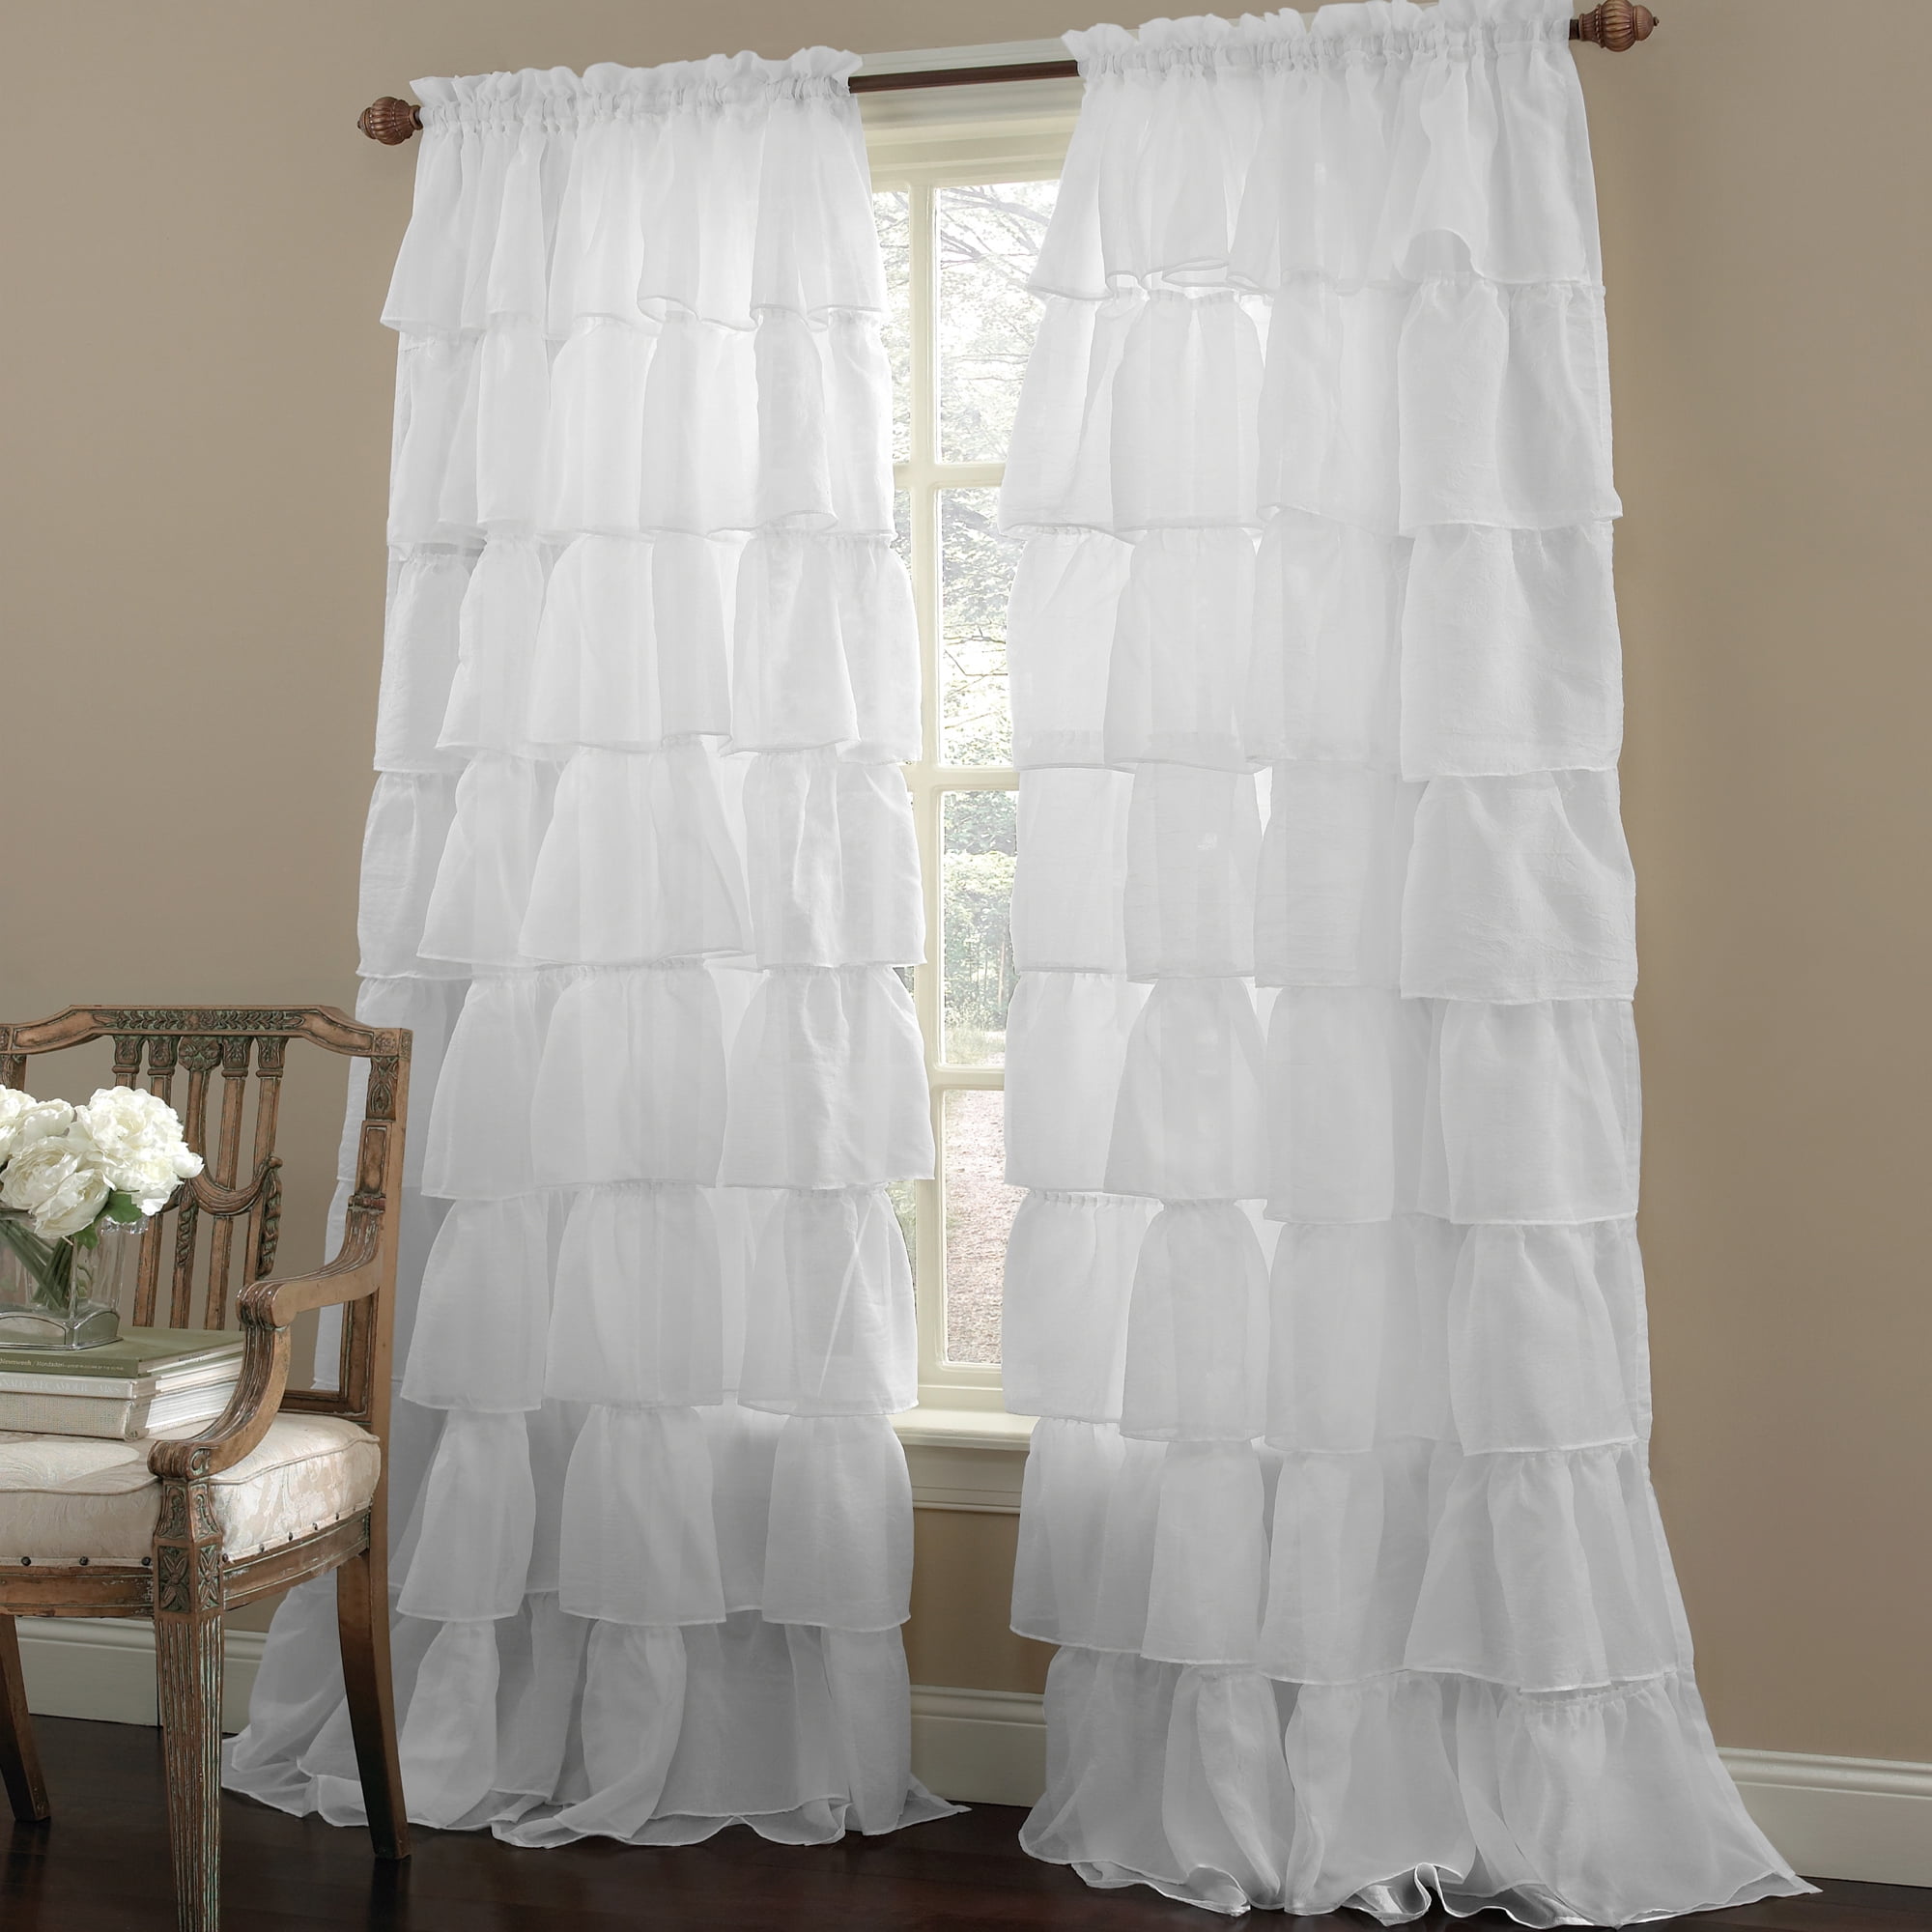 Gypsy Crushed Voile Cascading Layer 60" x 84" Window Curtain Single